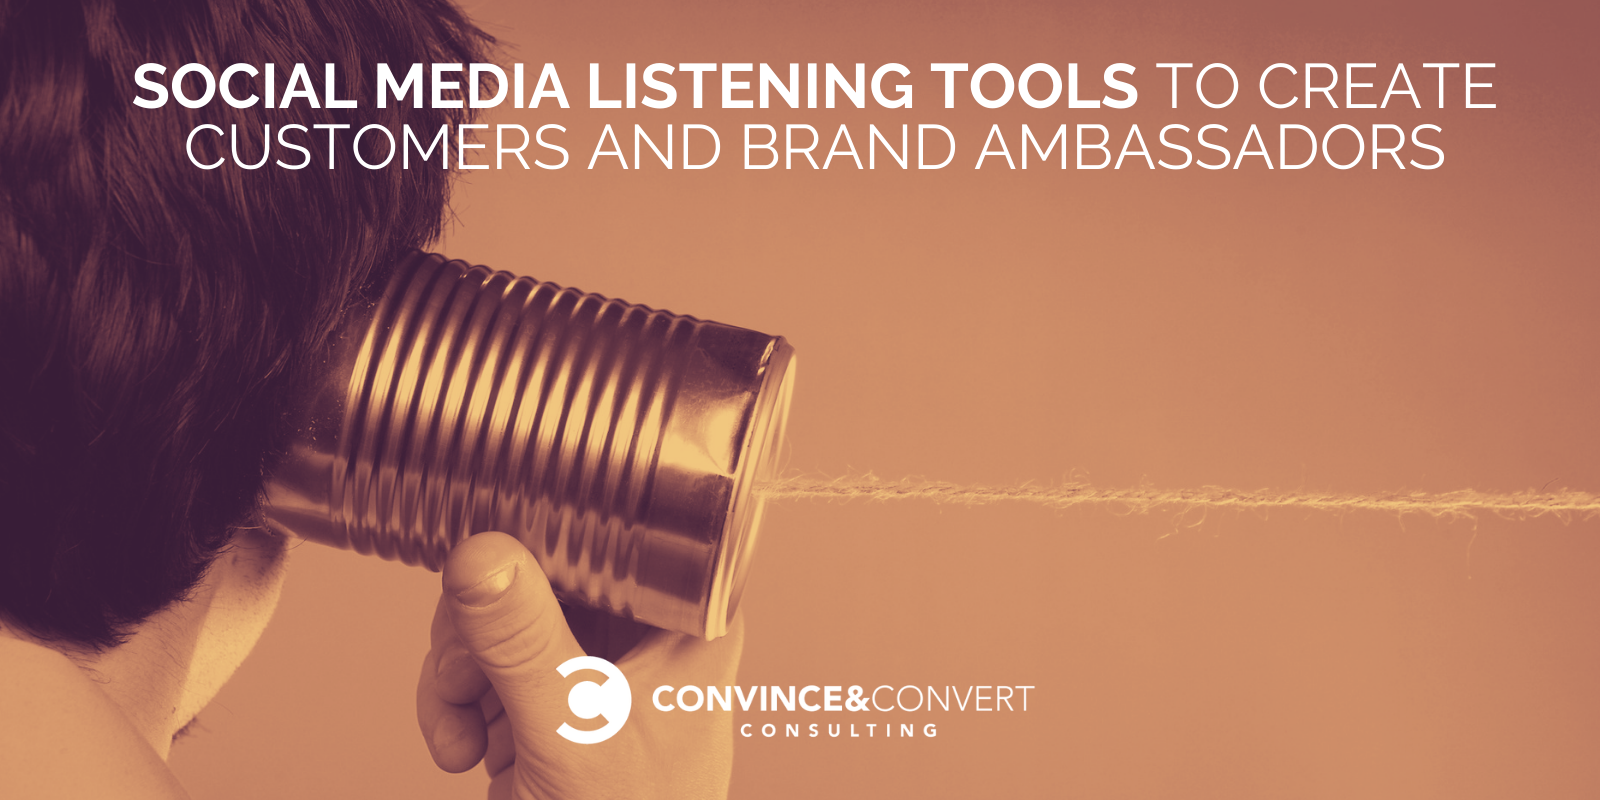 Top Social Media Listening Tools to Turn Followers into Customers and Brand Ambassadors